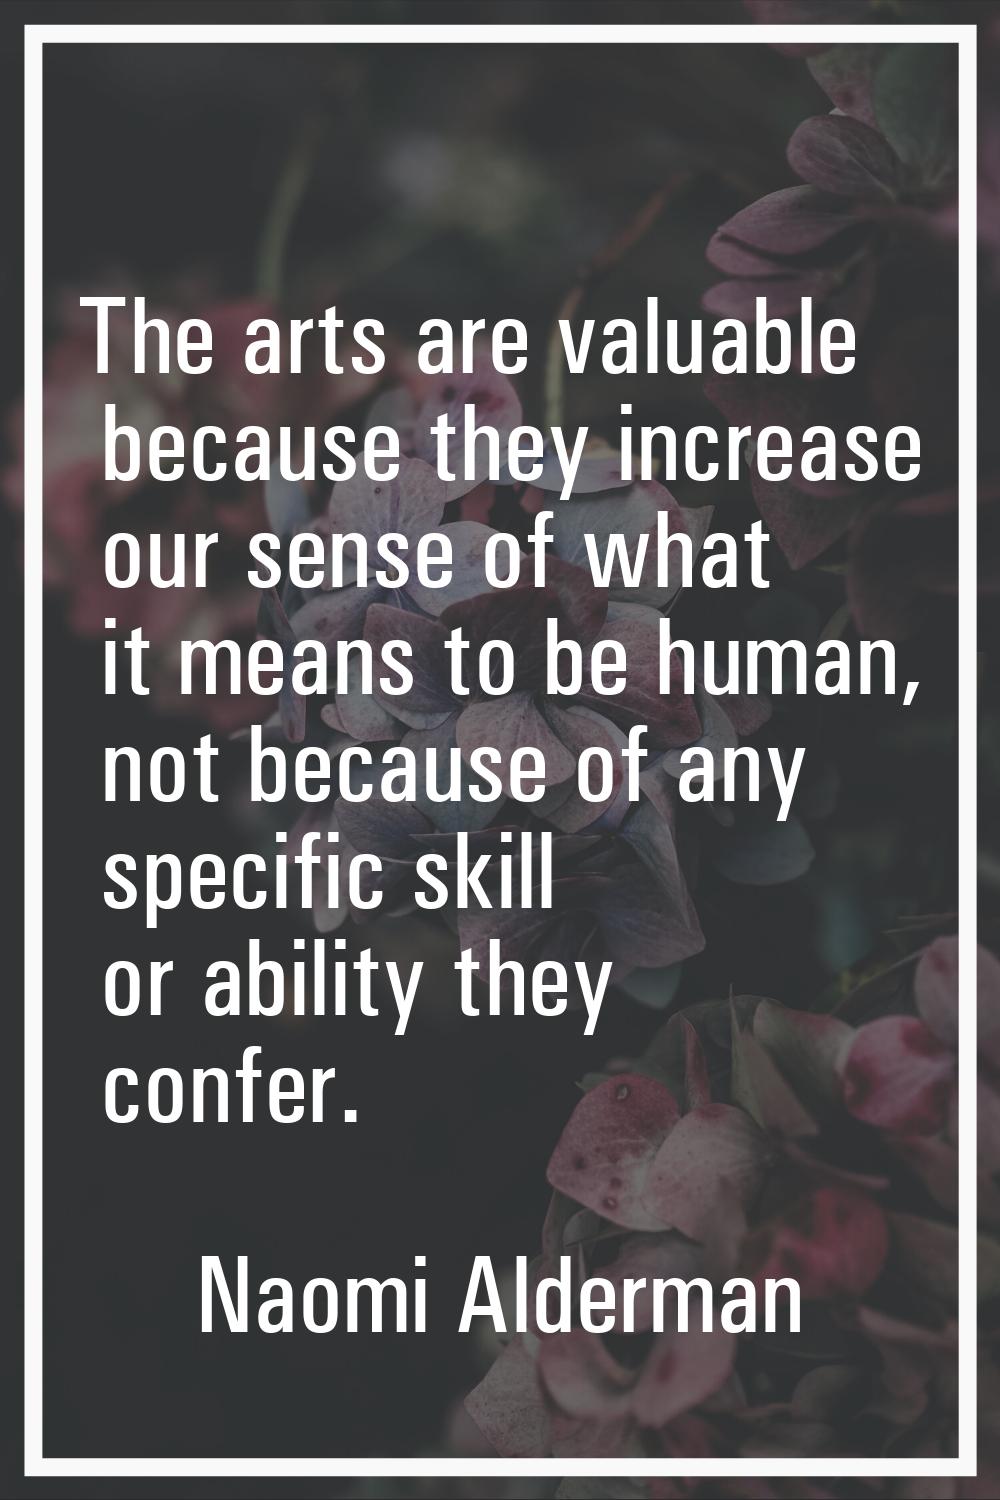 The arts are valuable because they increase our sense of what it means to be human, not because of 